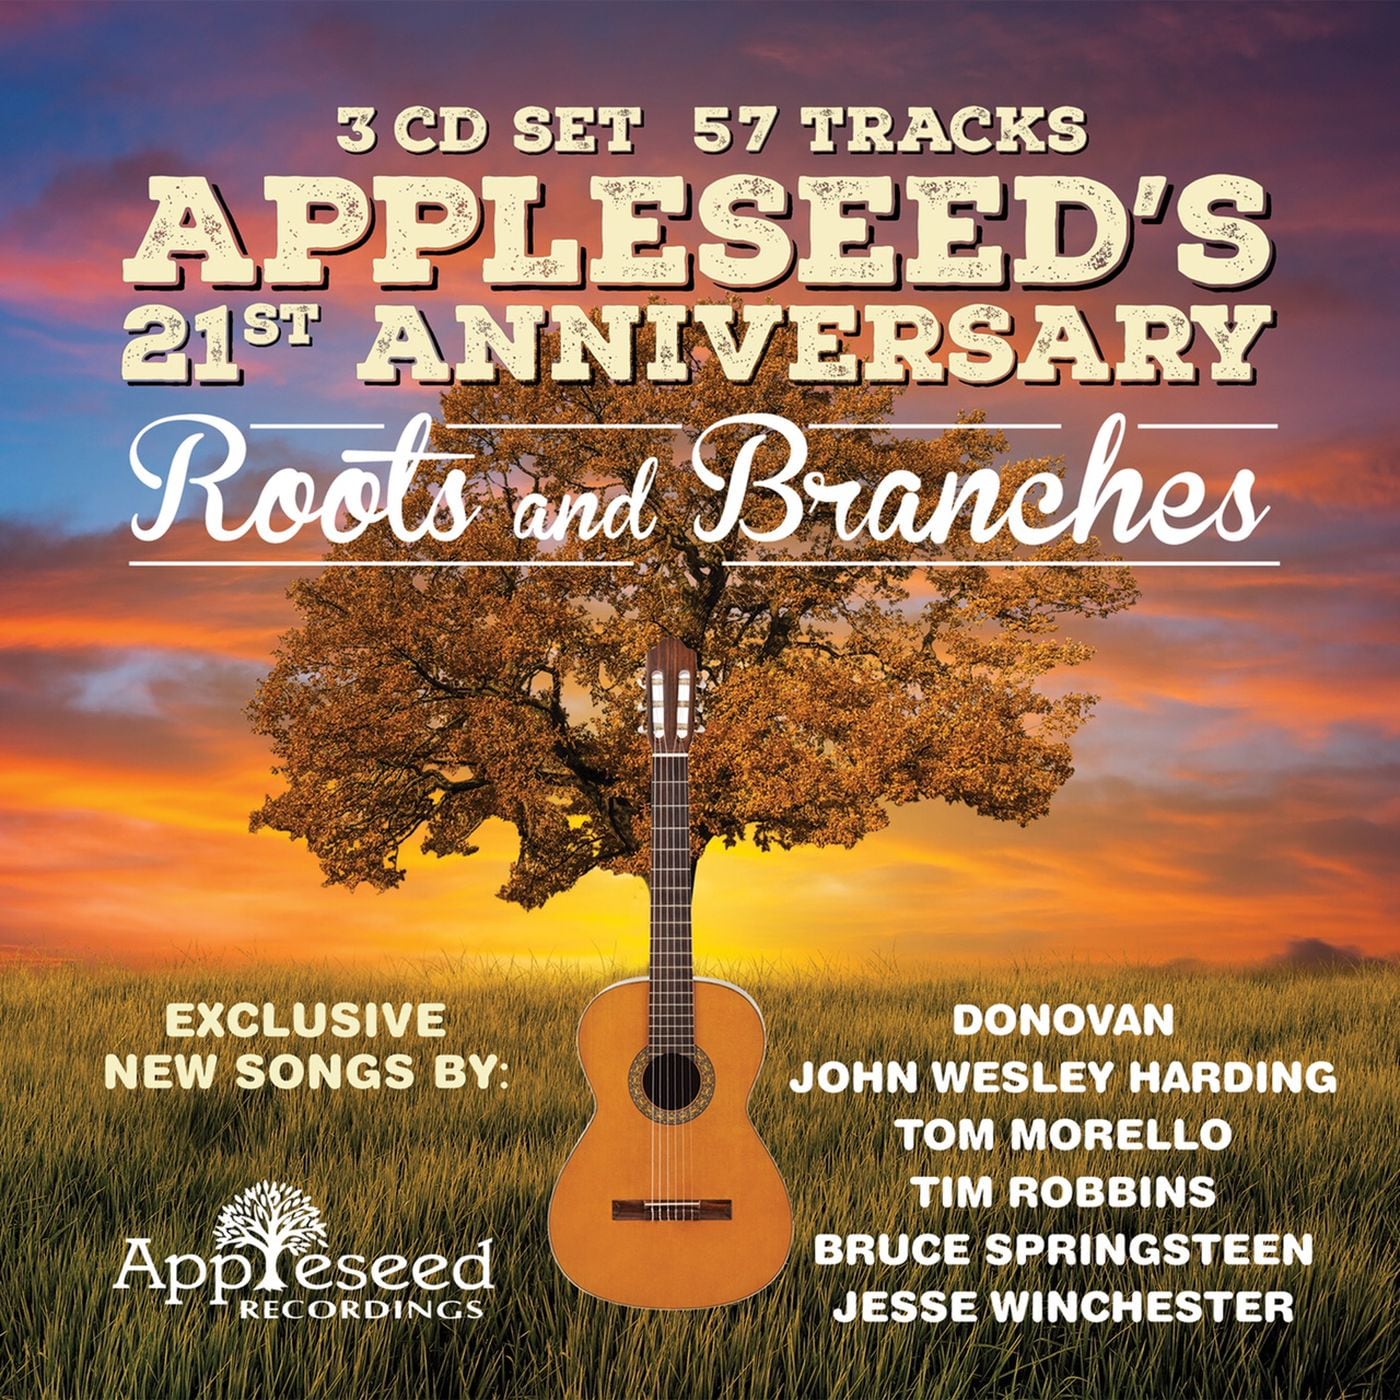 The cover of “Appleseed’s 21st Anniversary: Roots and Branches.”